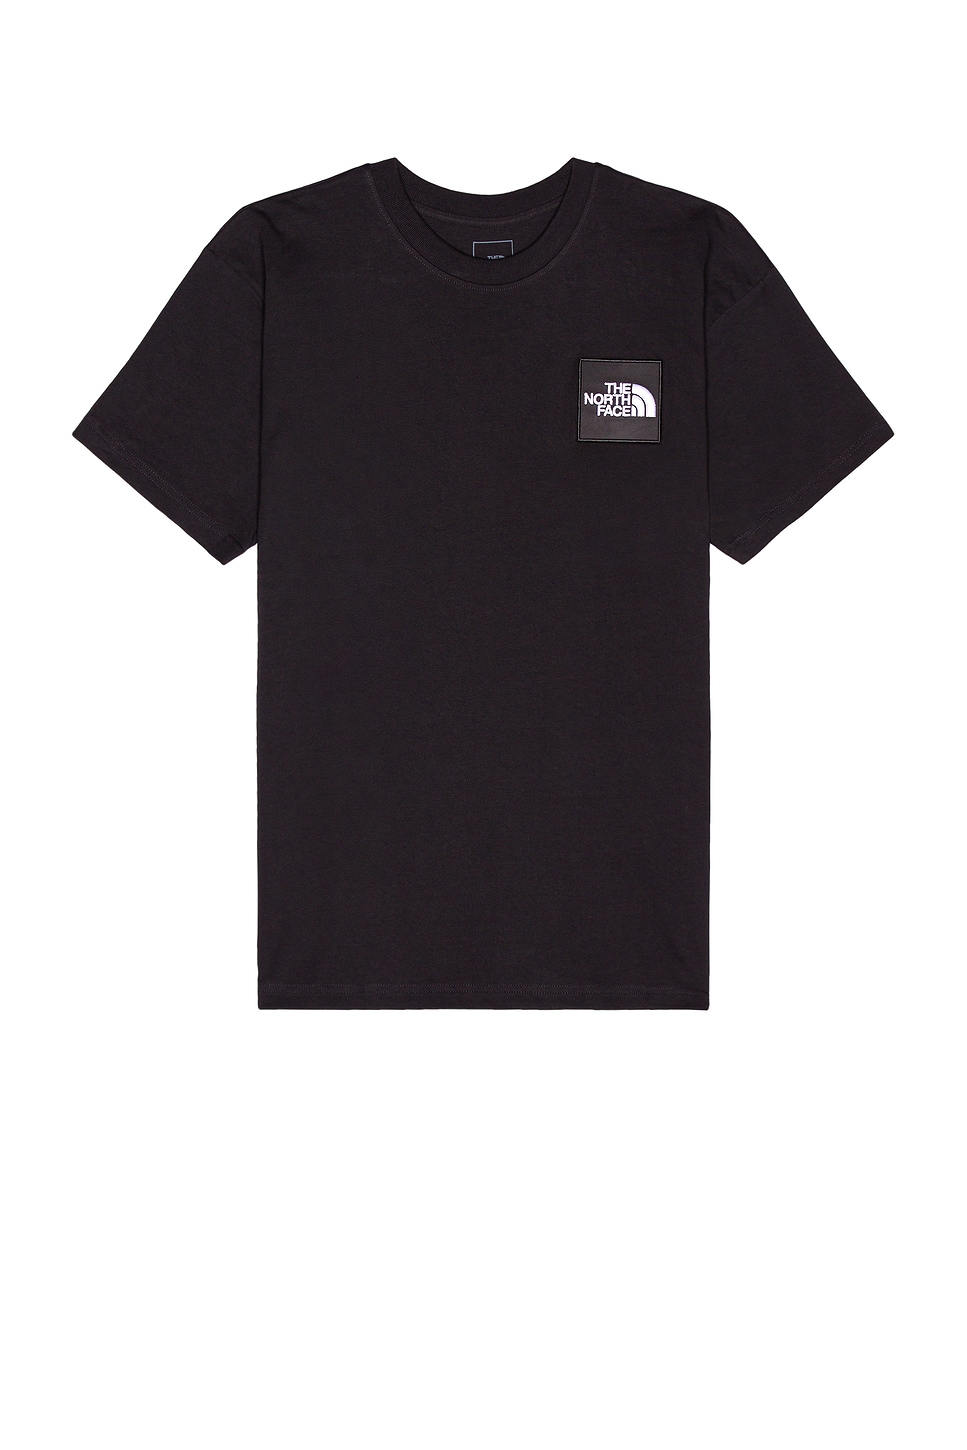 Image 1 of The North Face Heavyweight Box Tee in Black